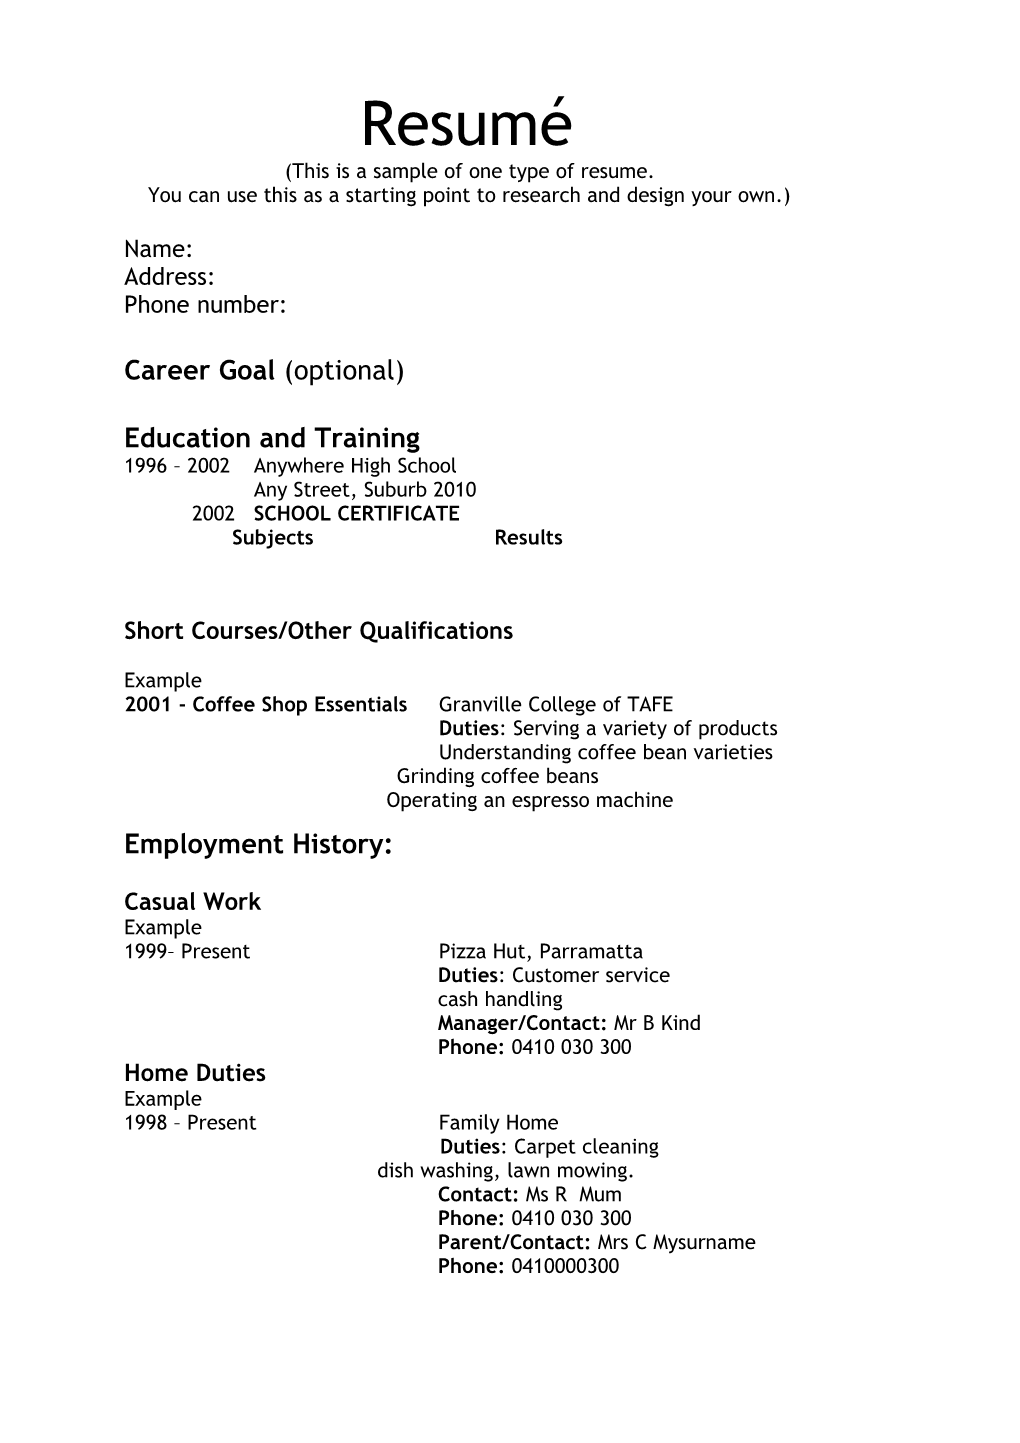 (This Is a Sample of One Type of Resume